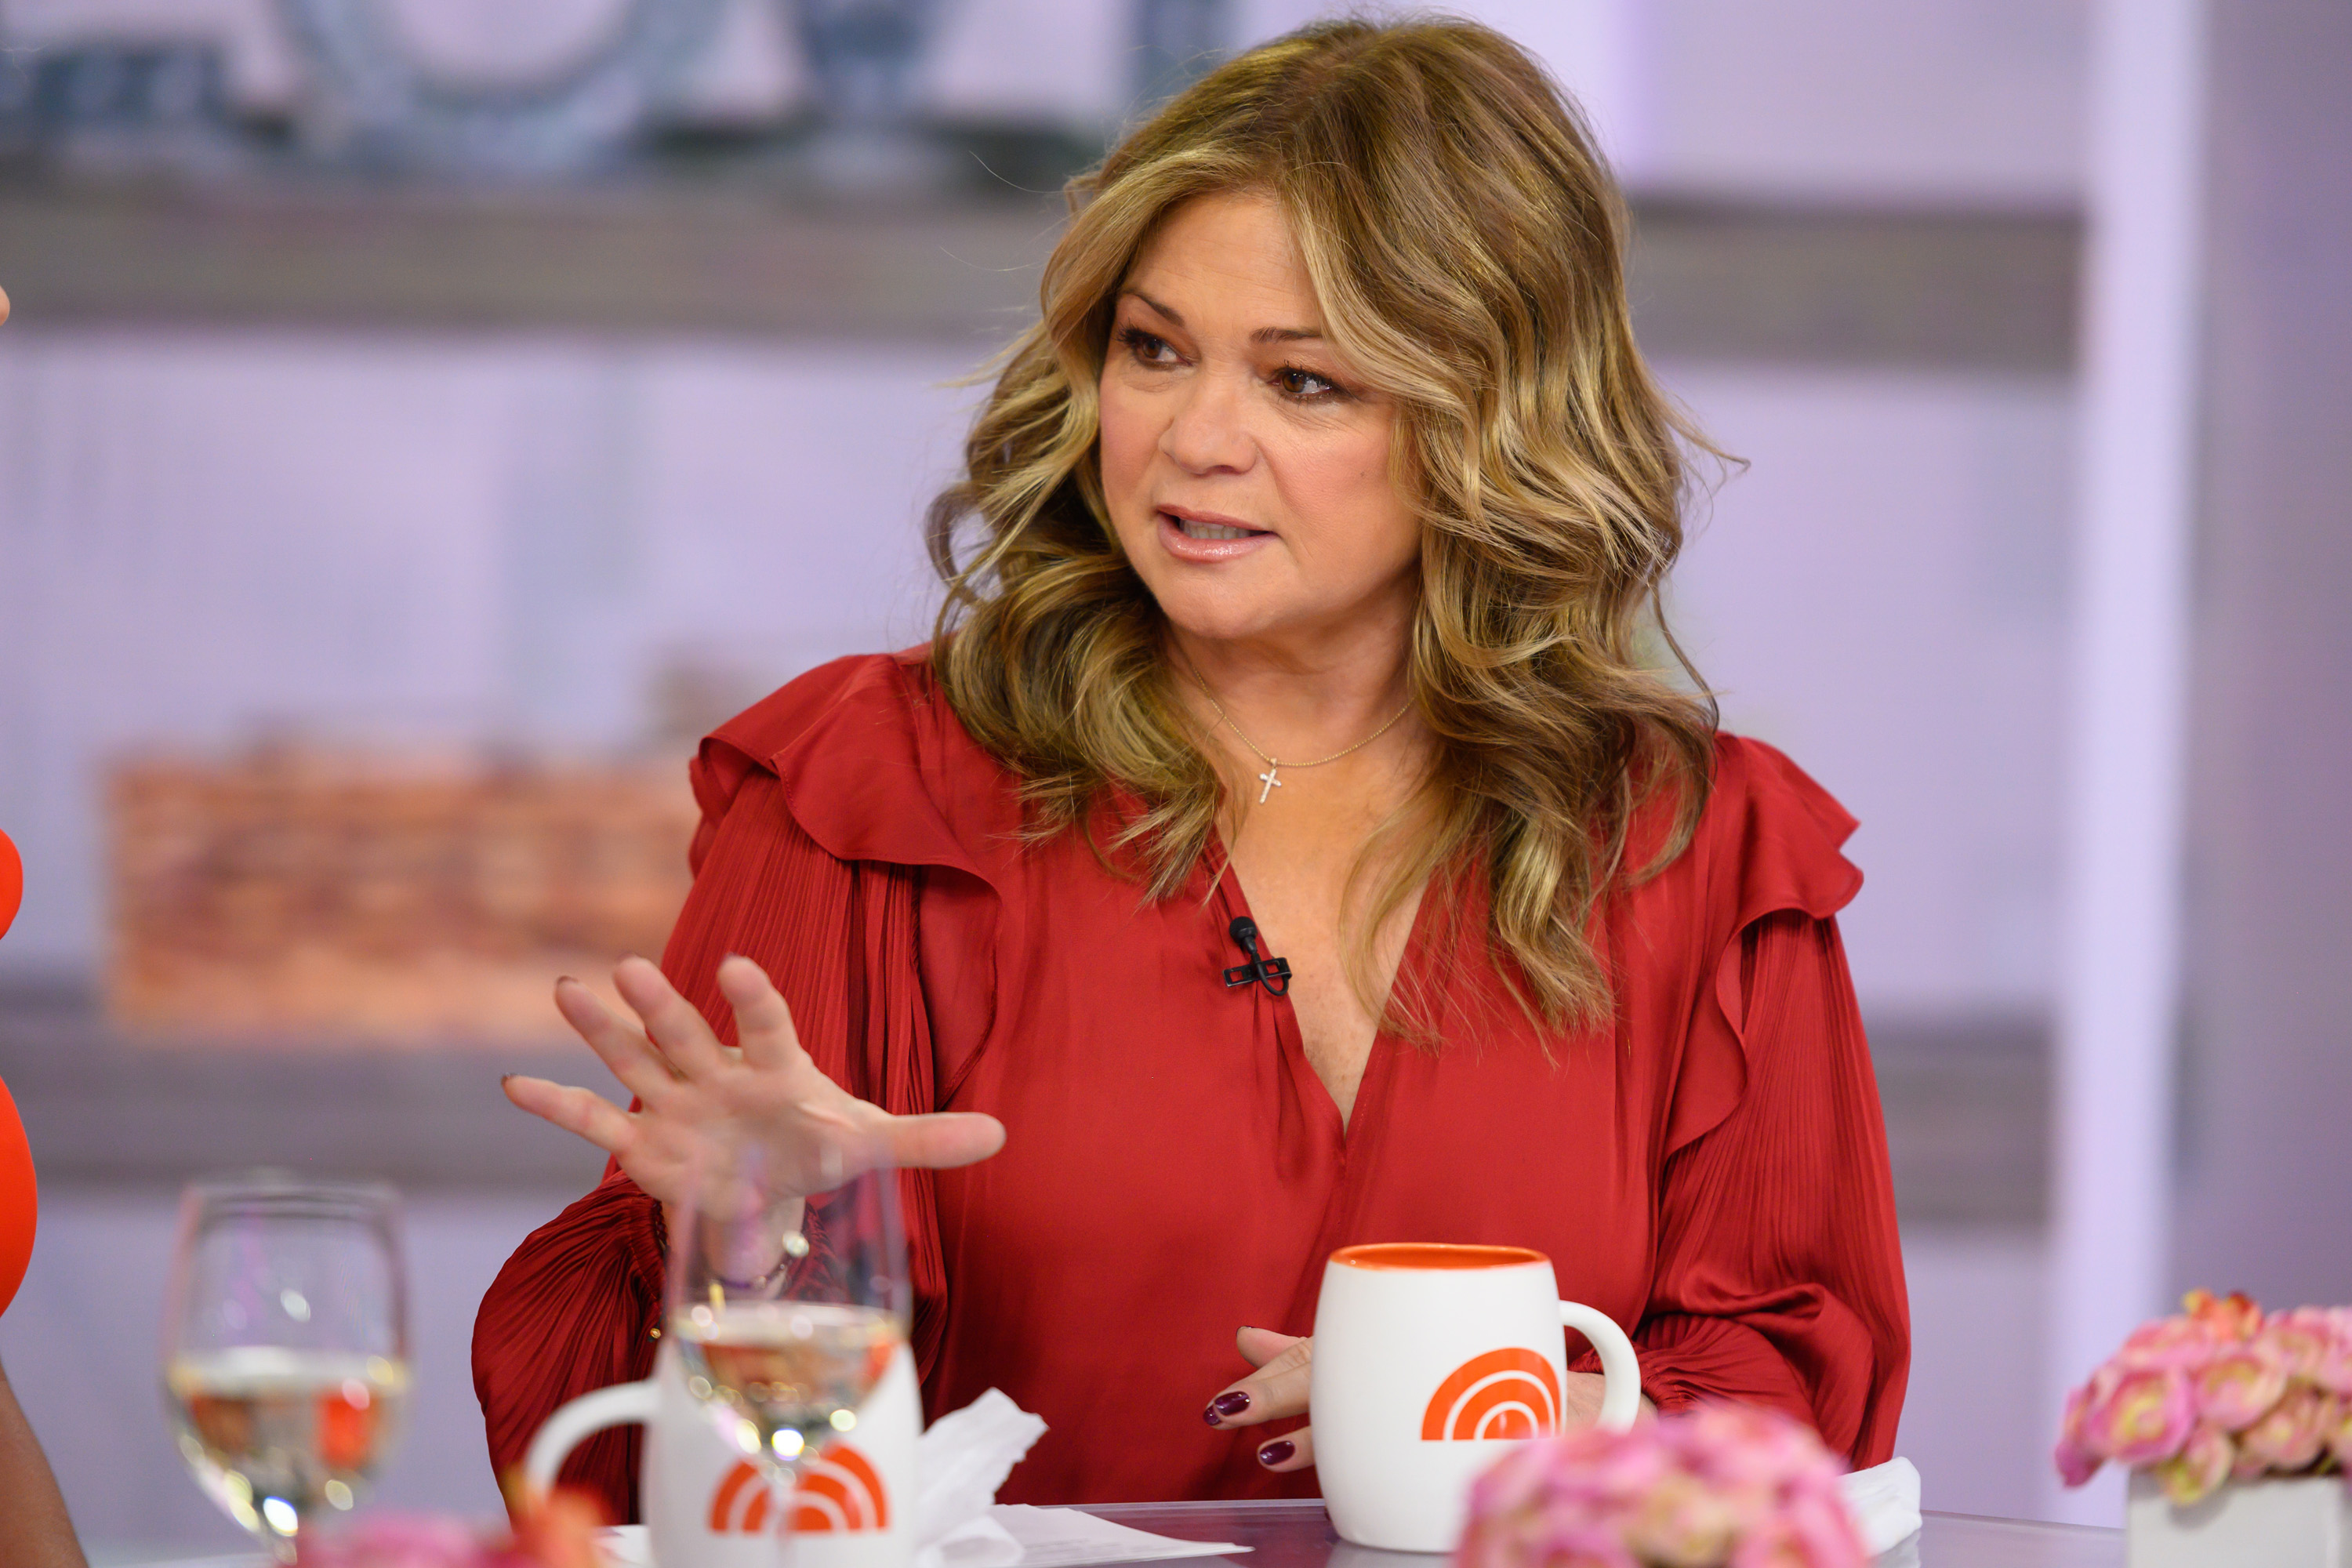 Actor Valerie Bertinelli wears a red blouse in a visit to 'Today.'